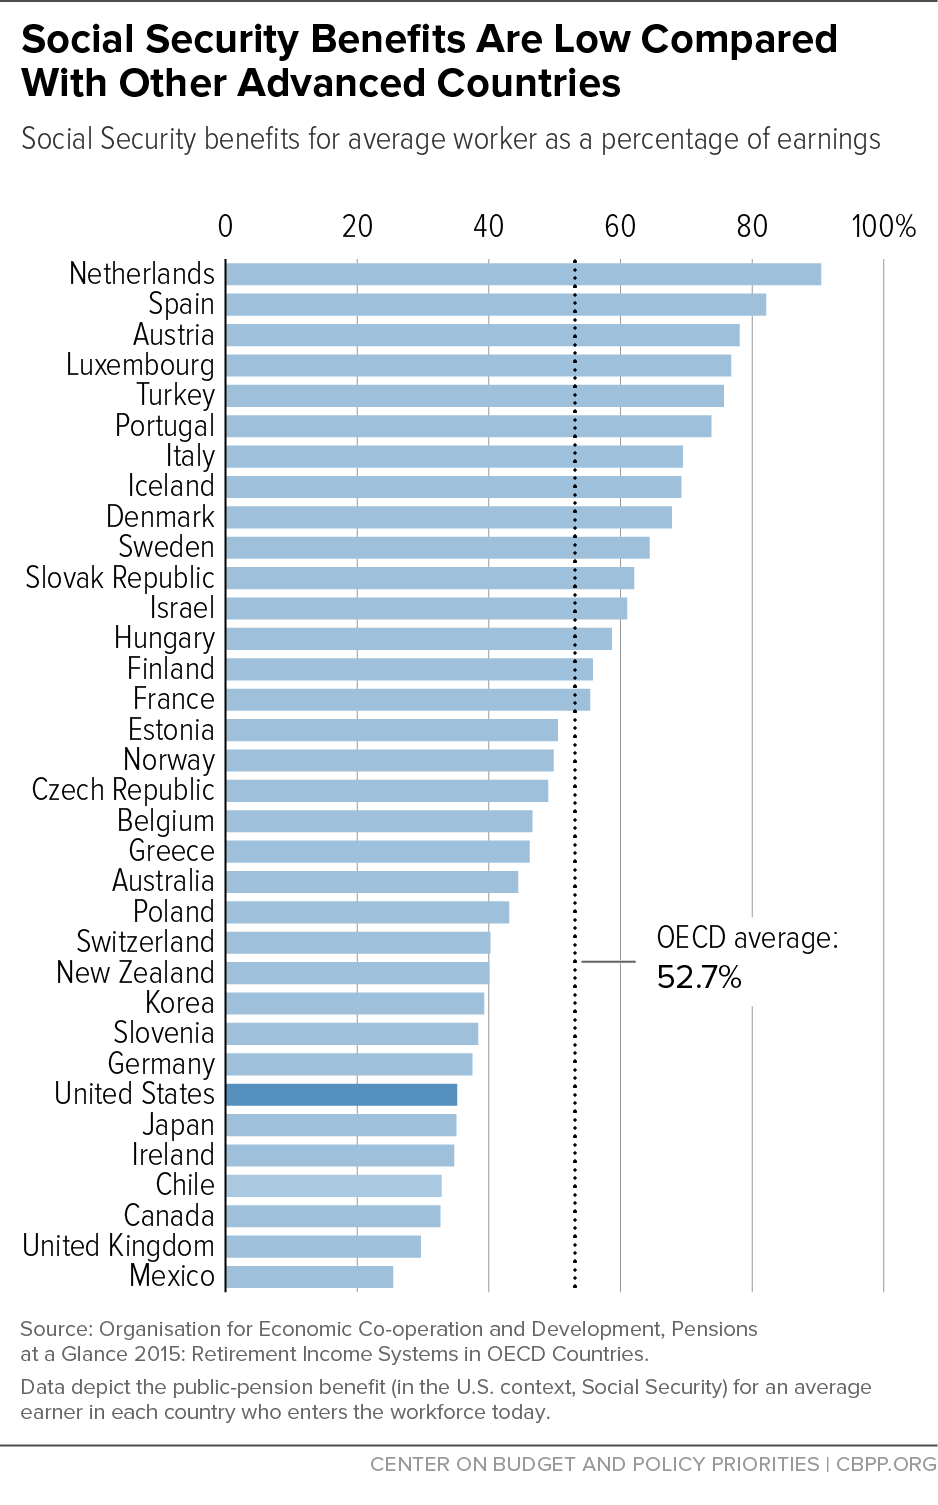 Social Security Benefits Are Low Compared With Other Advanced Countries